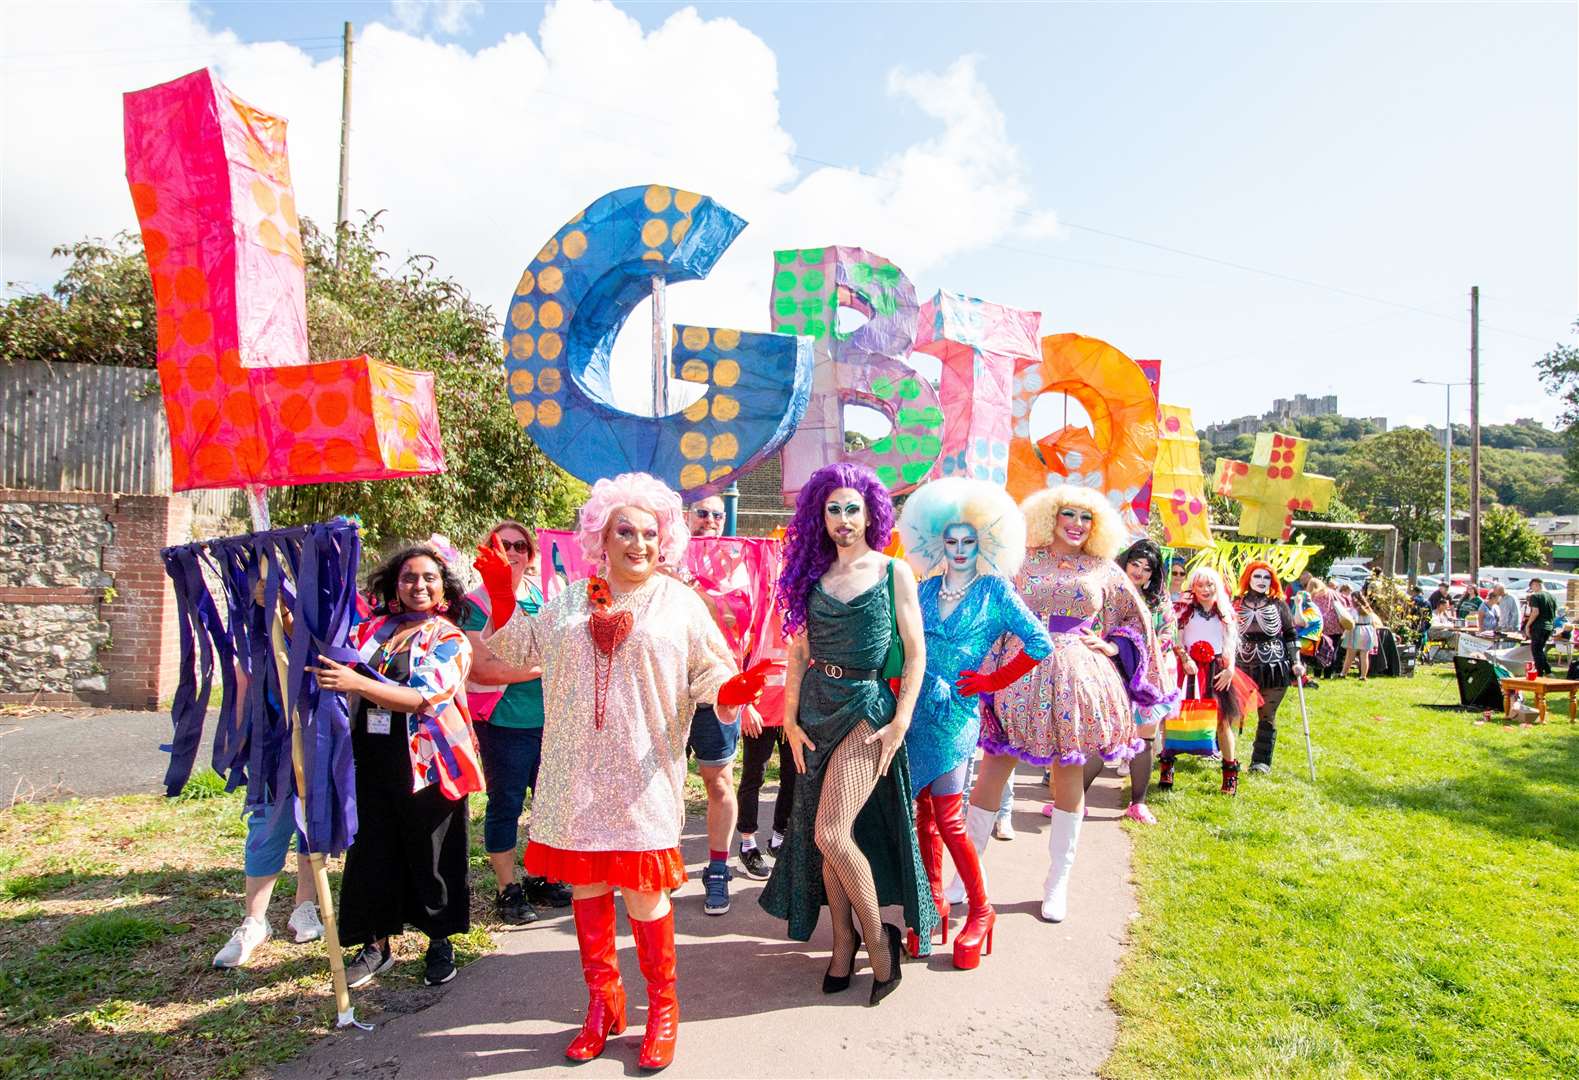 Celebrations took place for the fifth year. Picture: David Goodson/Dover Pride